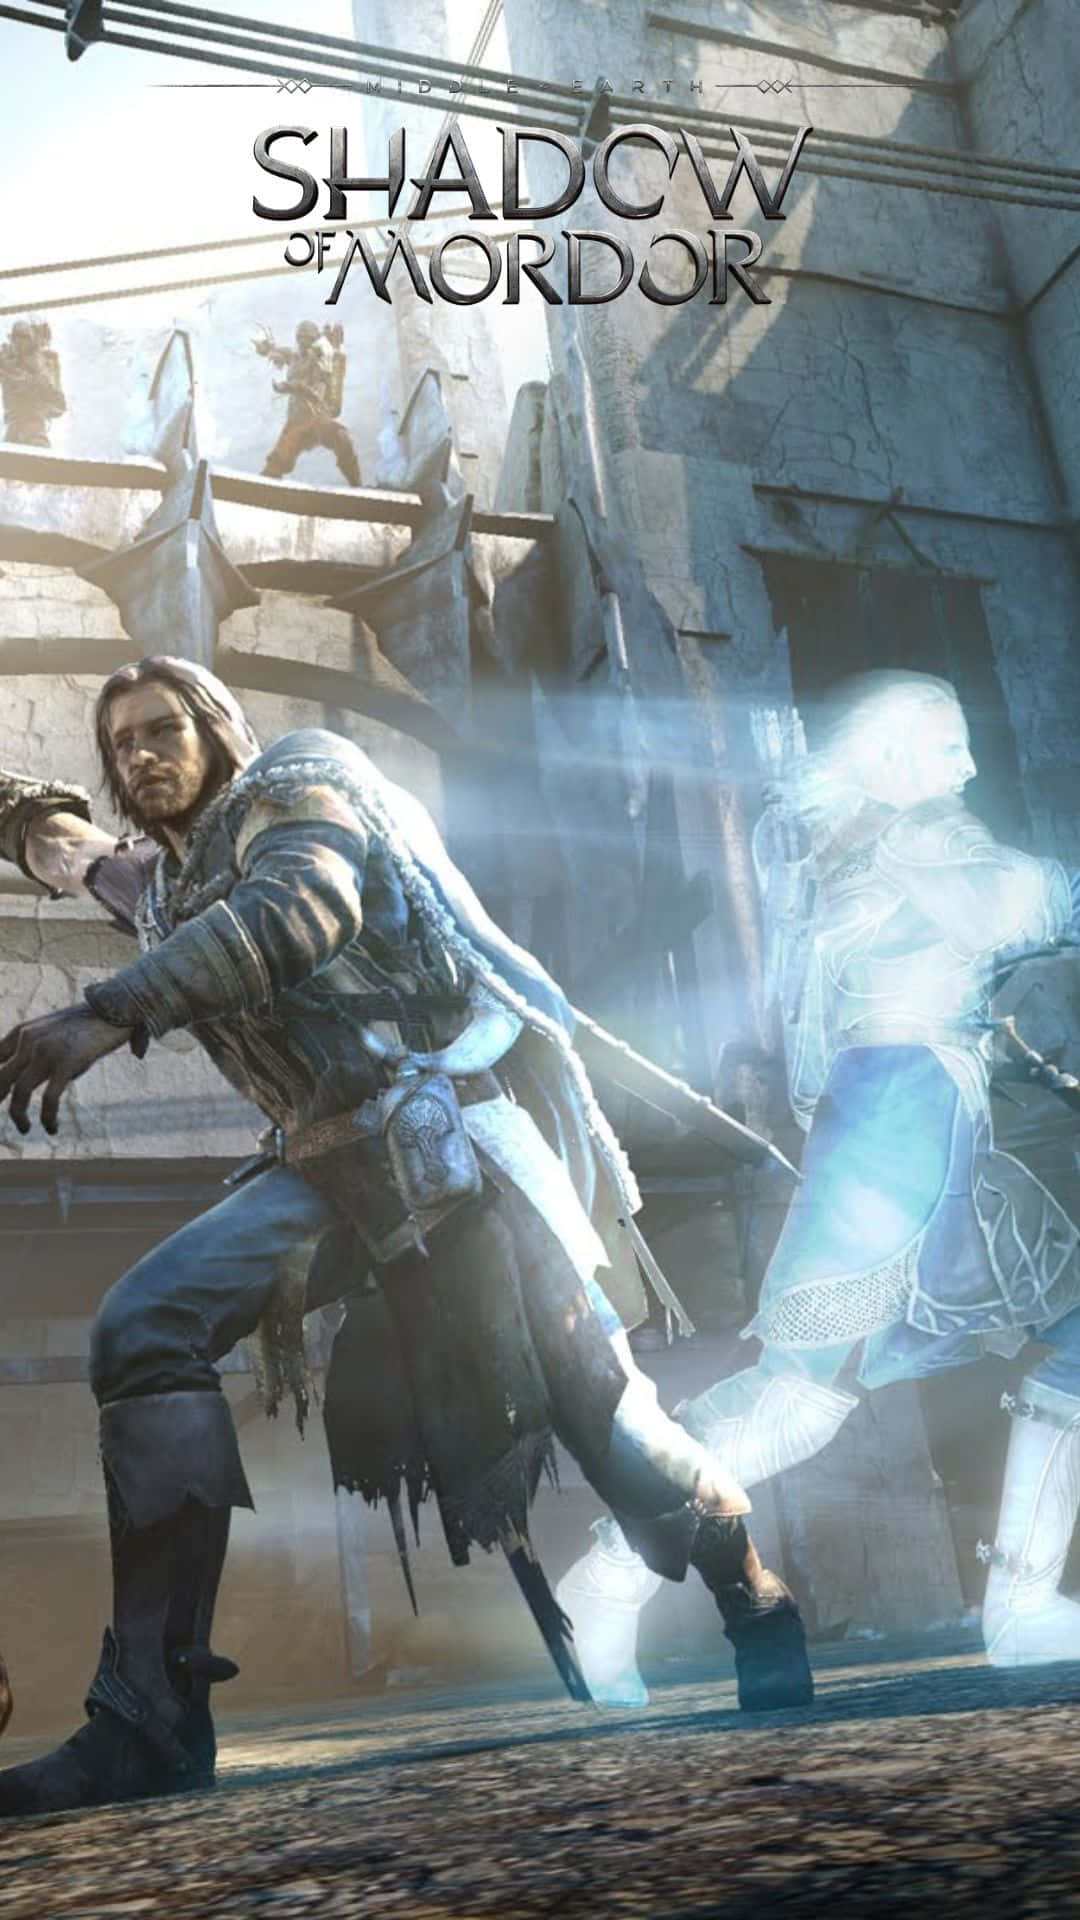 "Enter the world of Shadow of Mordor from your Android device"